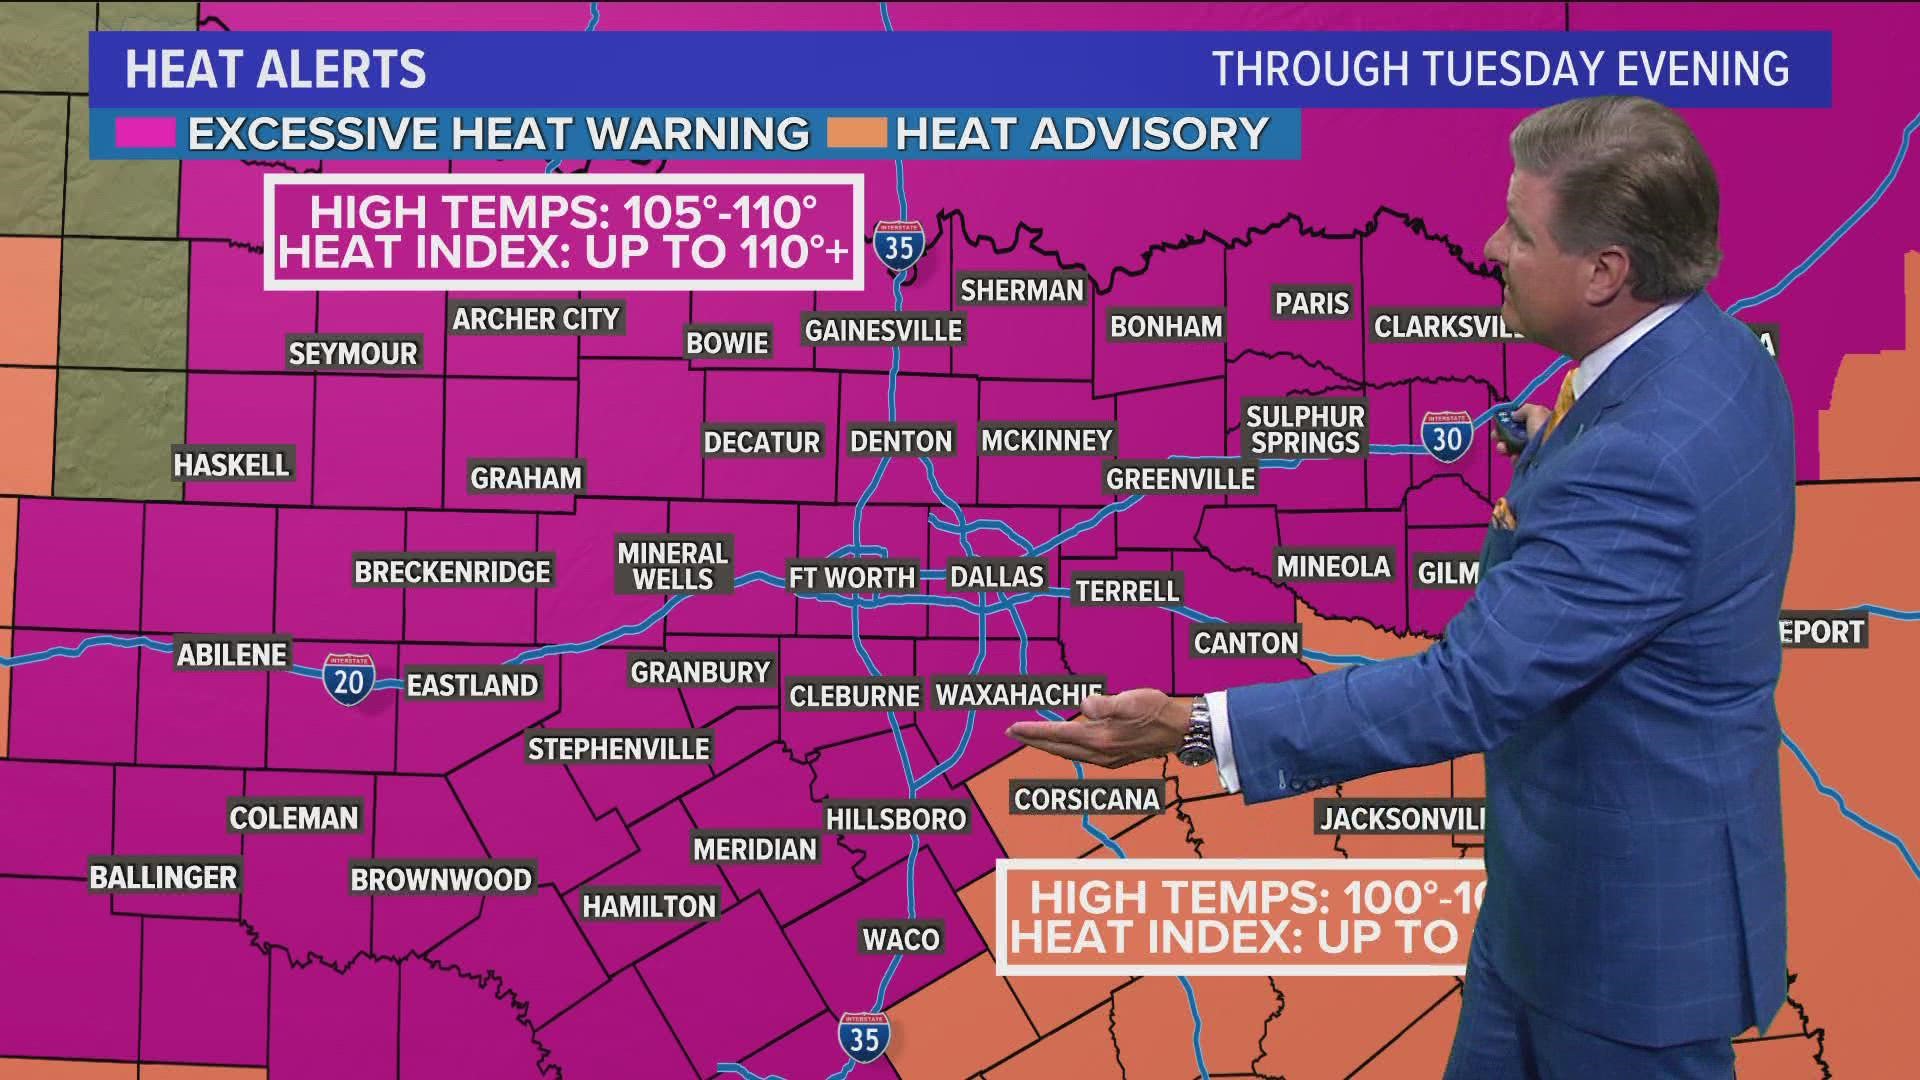 An excessive heat warning remains in effect through Tuesday. A critical fire danger, or red flag warning, is also in effect for most of North Texas.